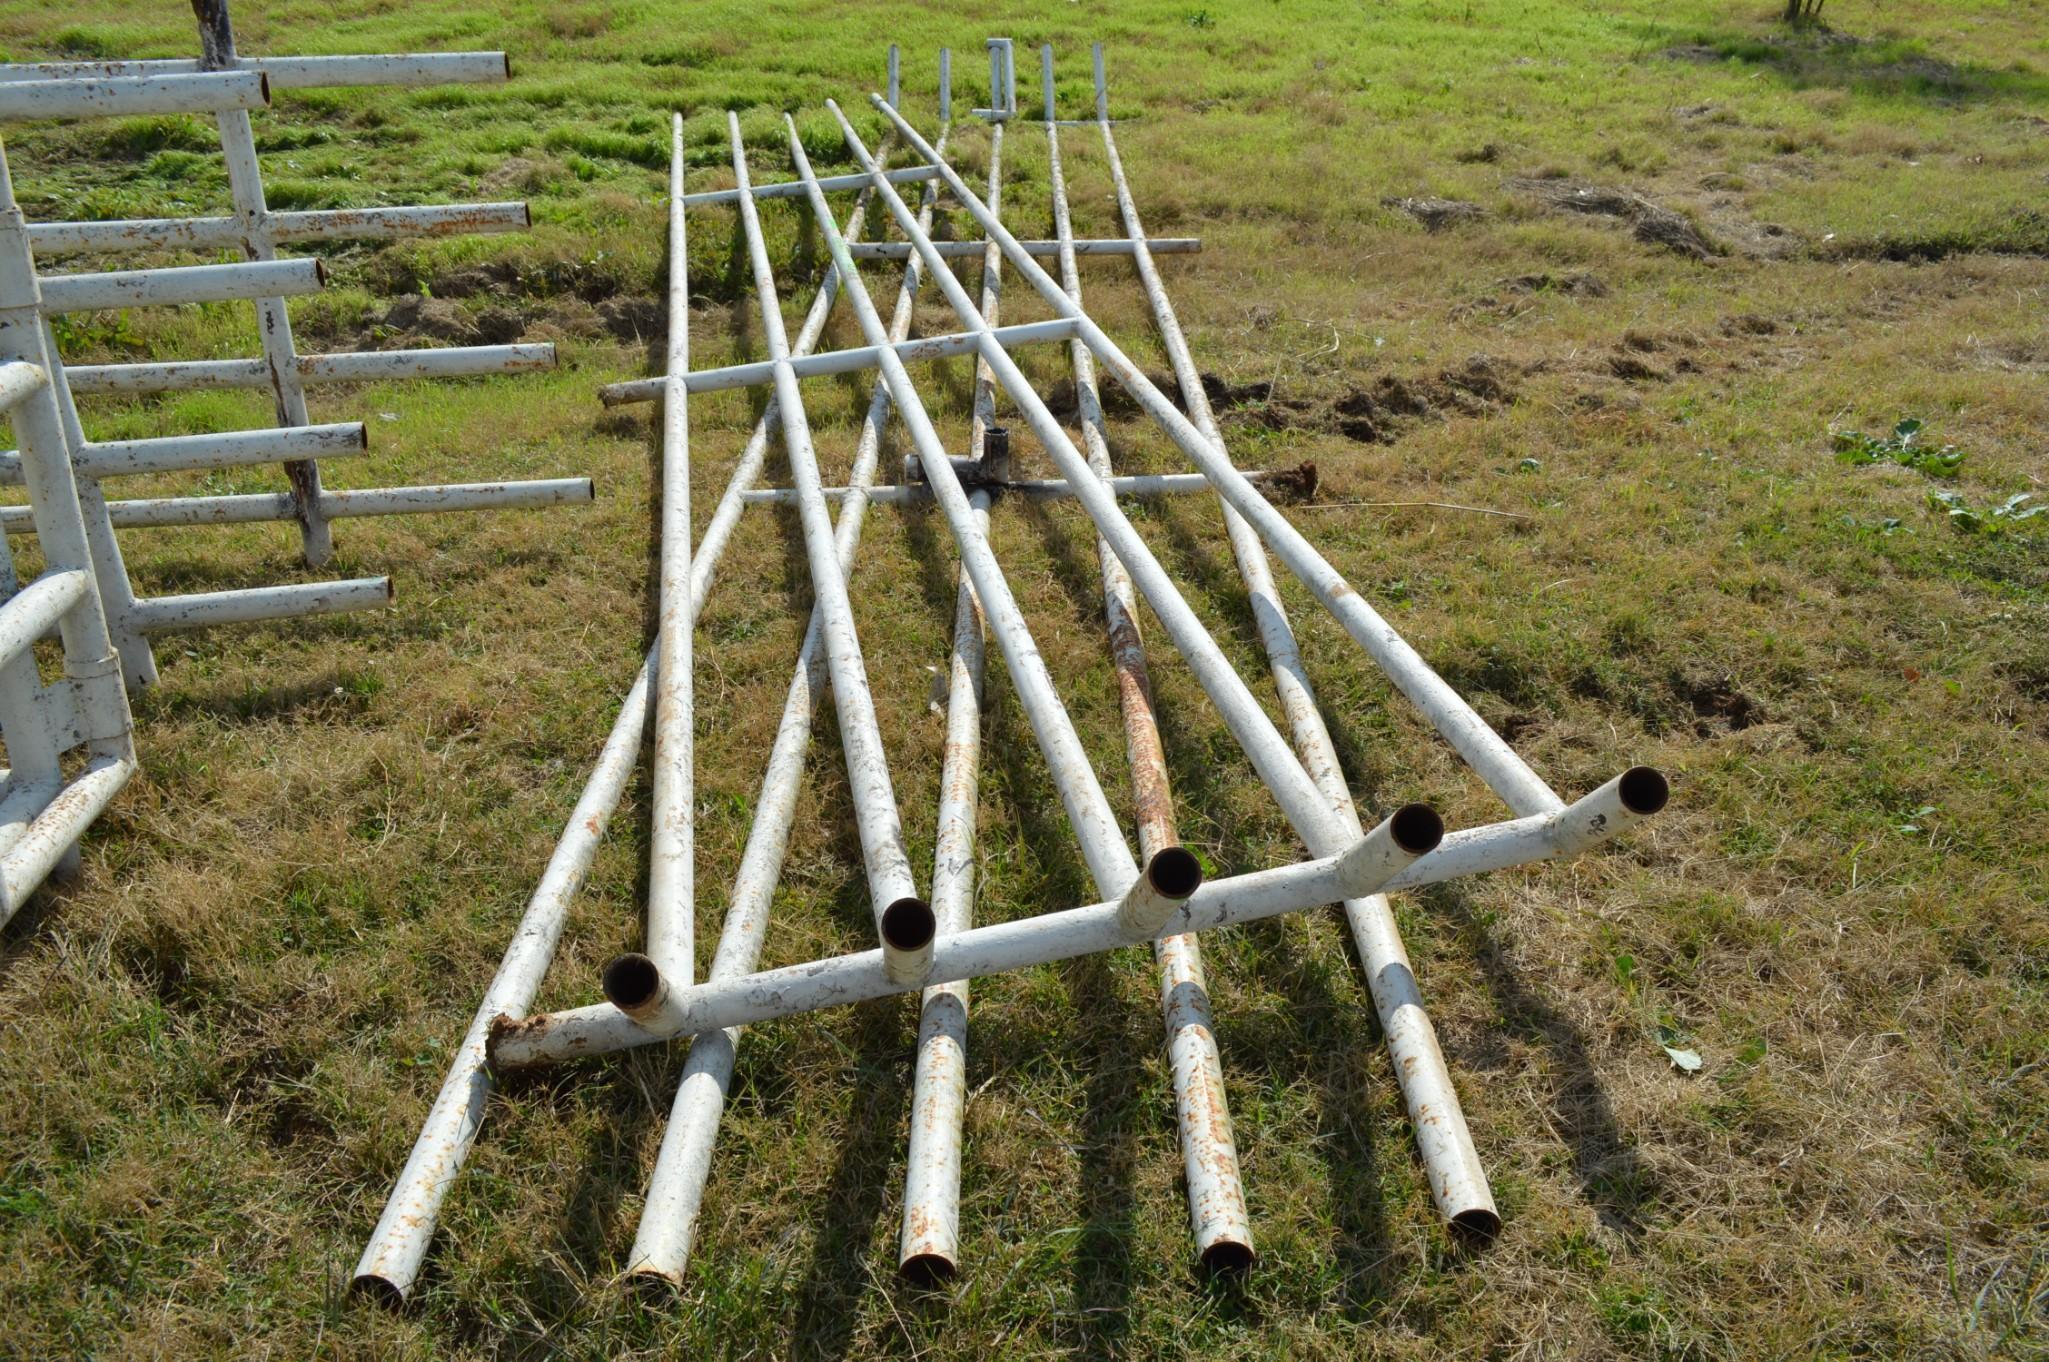 Back Pens for Roping Arena - Includes Calf Chute, Steer Chute, Boxes etc.